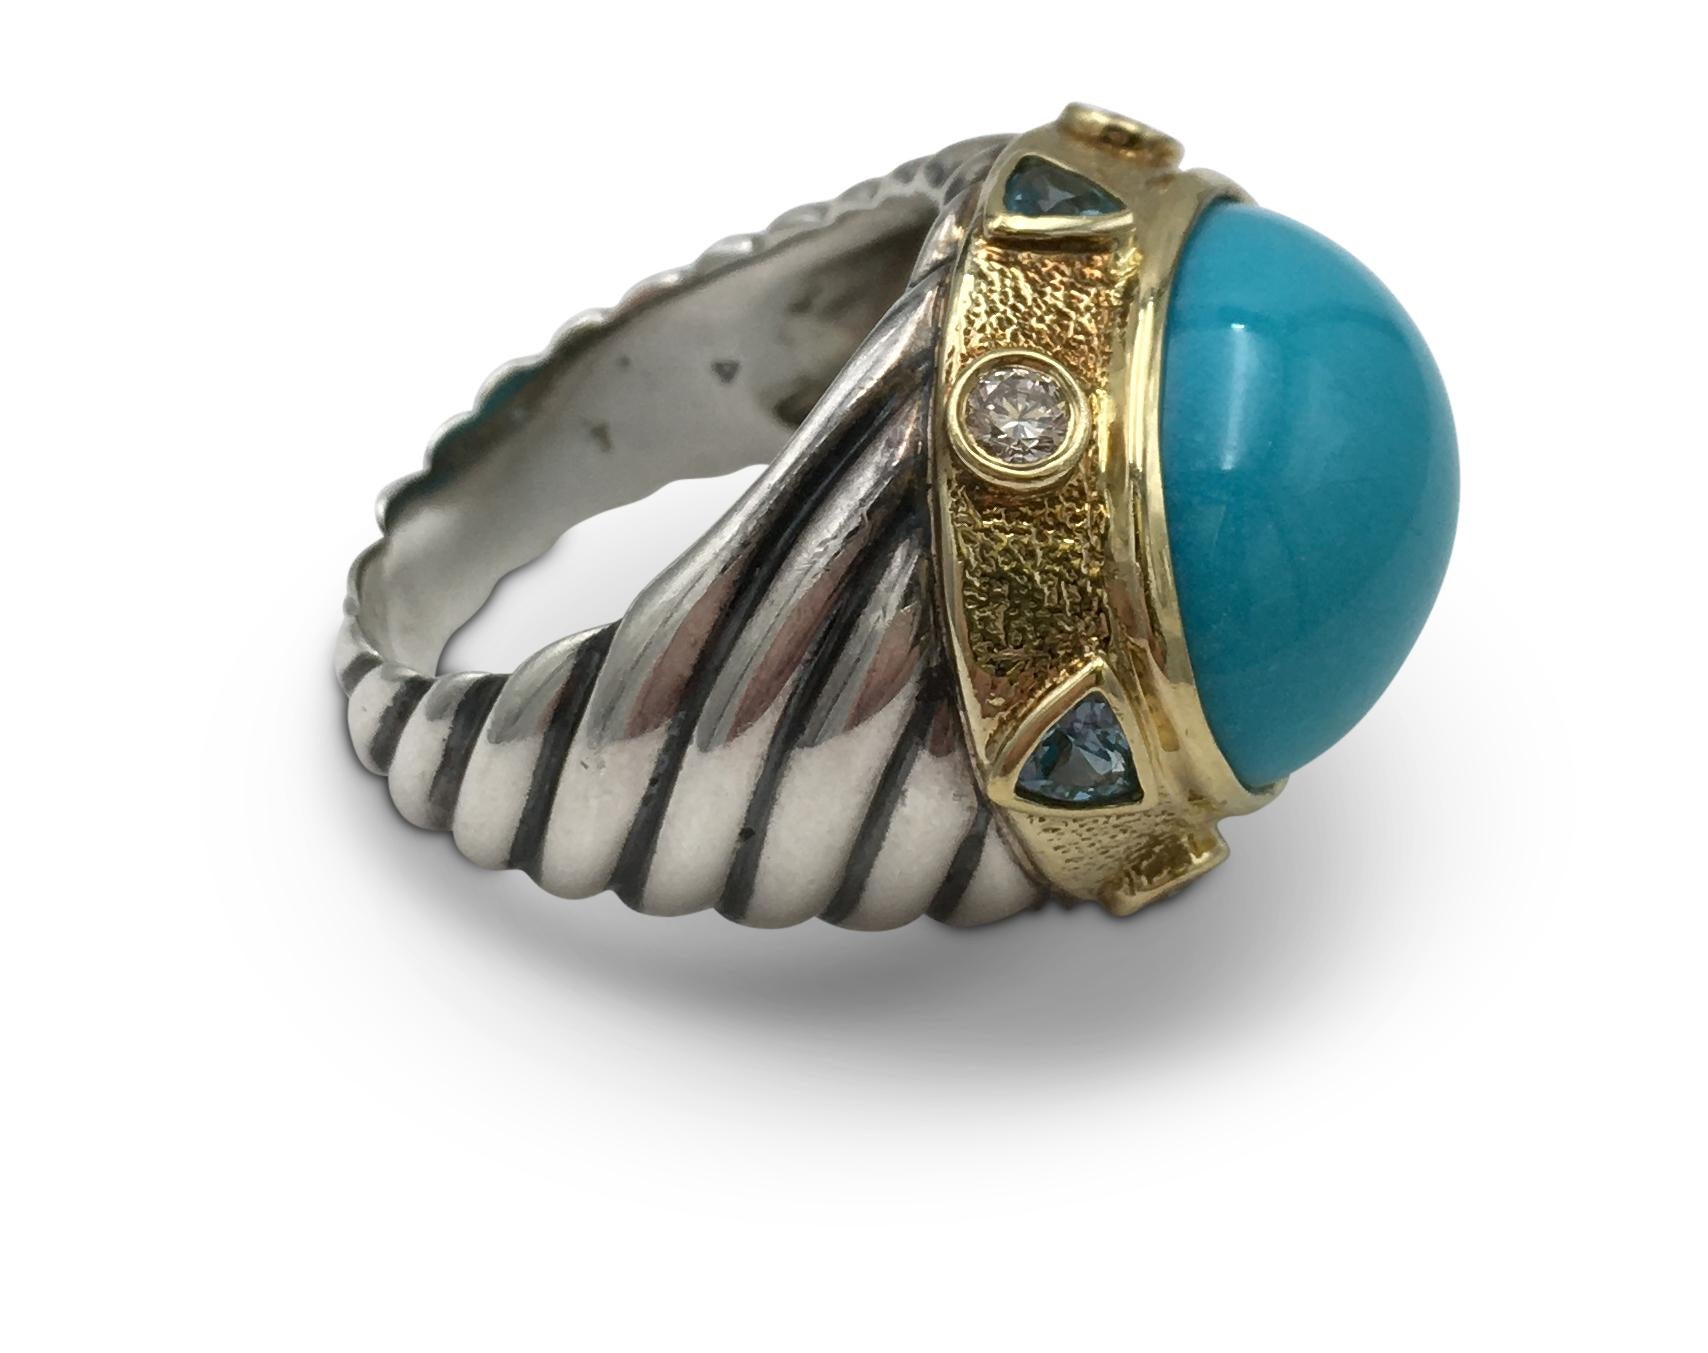 Authentic David Yurman ring crafted in sterling silver with 18 karat yellow gold. The ring centers on a large smooth oval cabochon shaped turquoise stone surrounded by four triangular blue zircon stones and round brilliant cut diamonds weighing